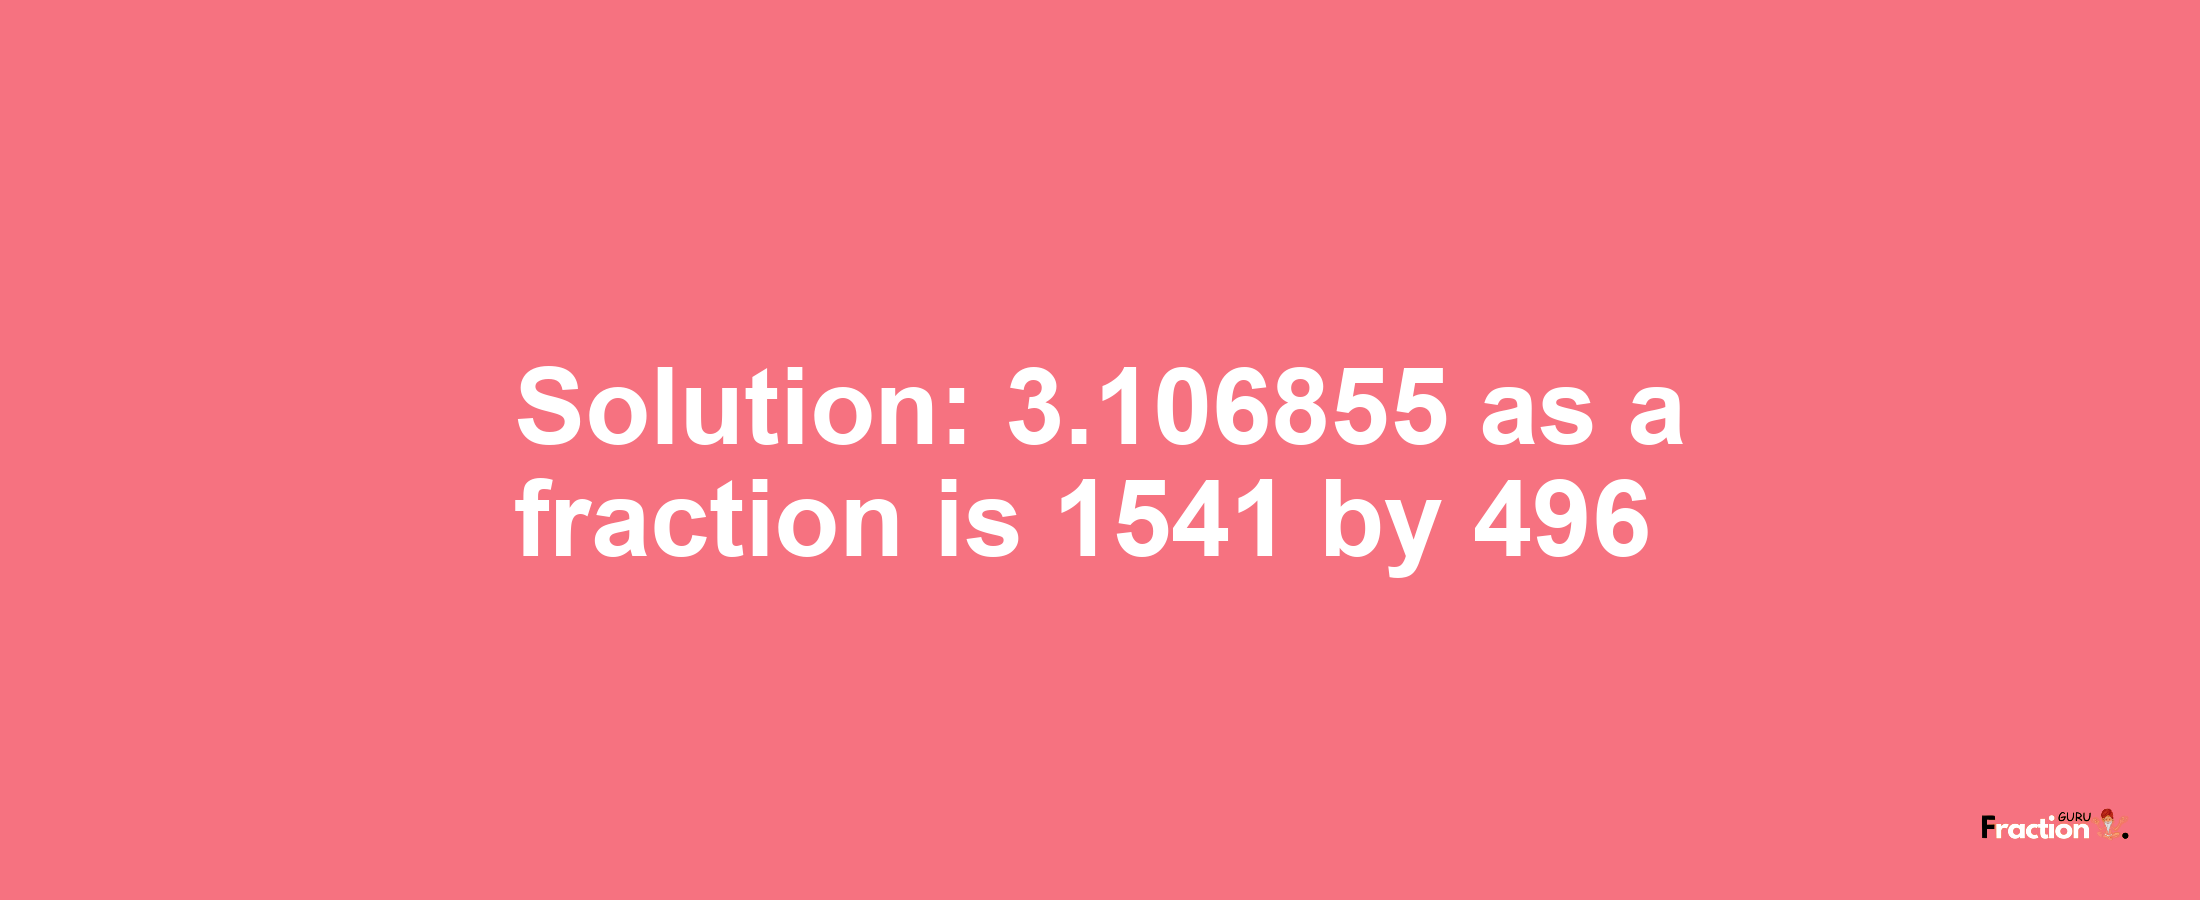 Solution:3.106855 as a fraction is 1541/496